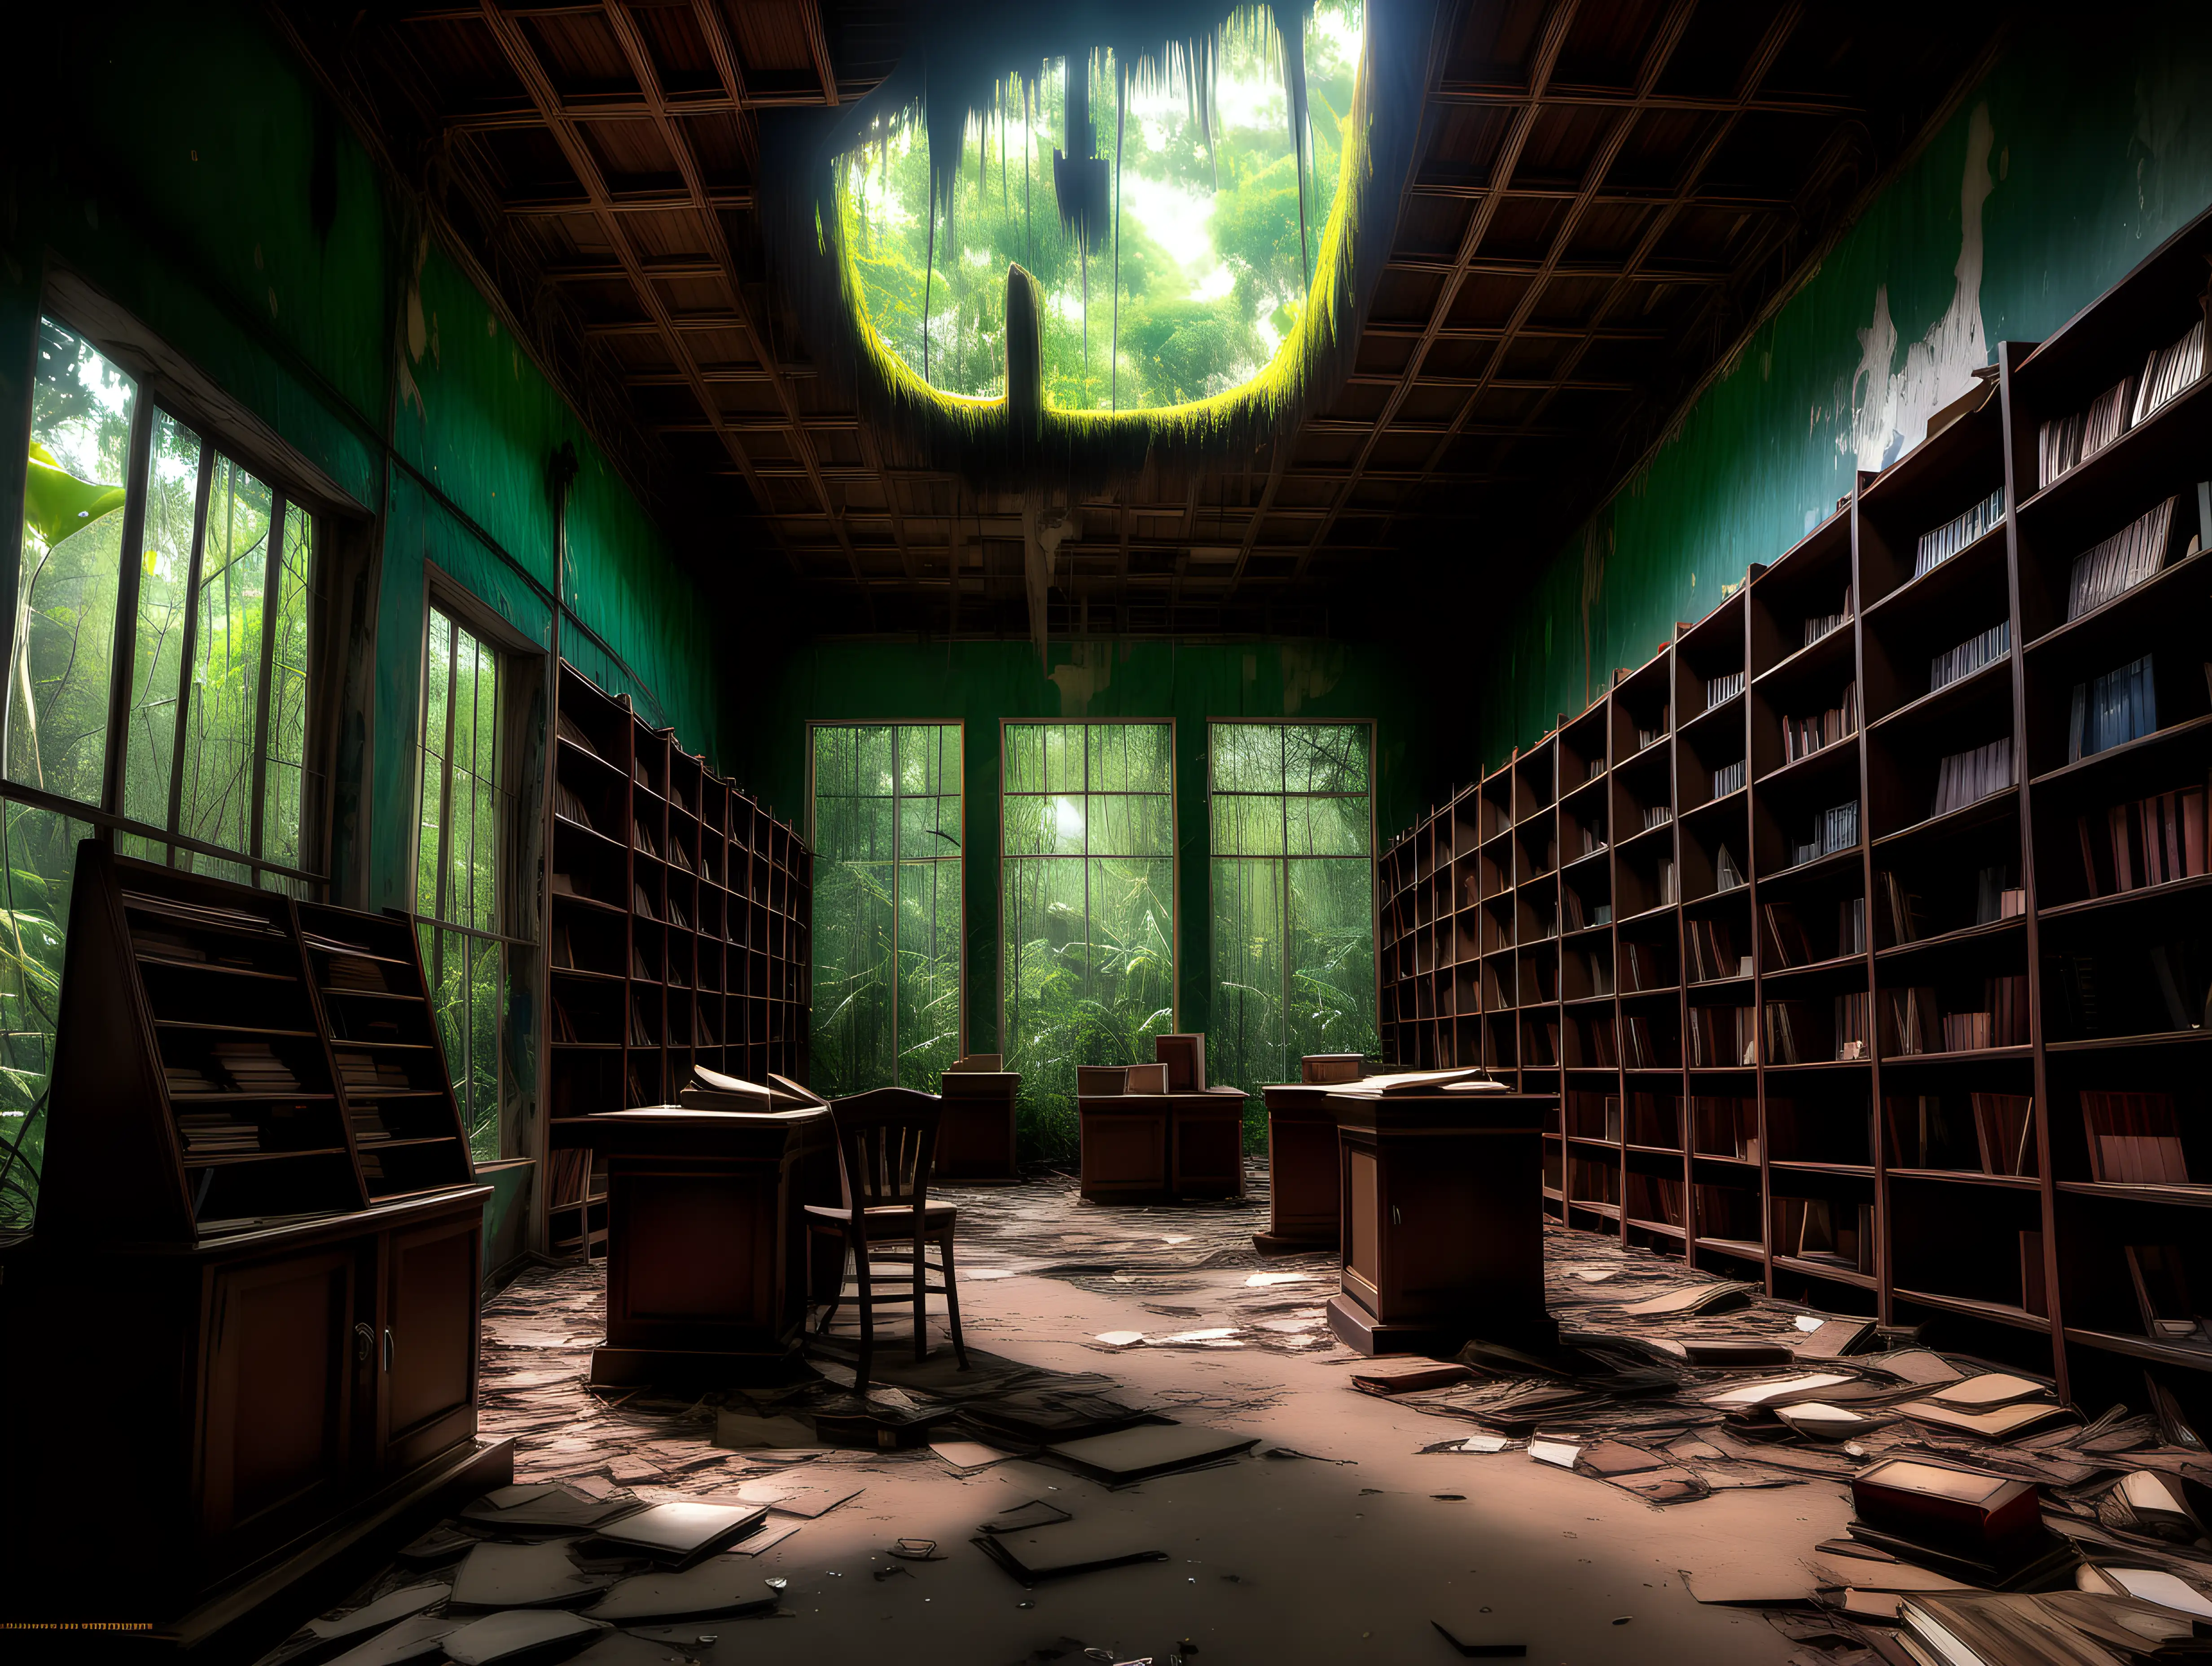 Exploring an Abandoned Amazon Library in Frank Frazetta Style